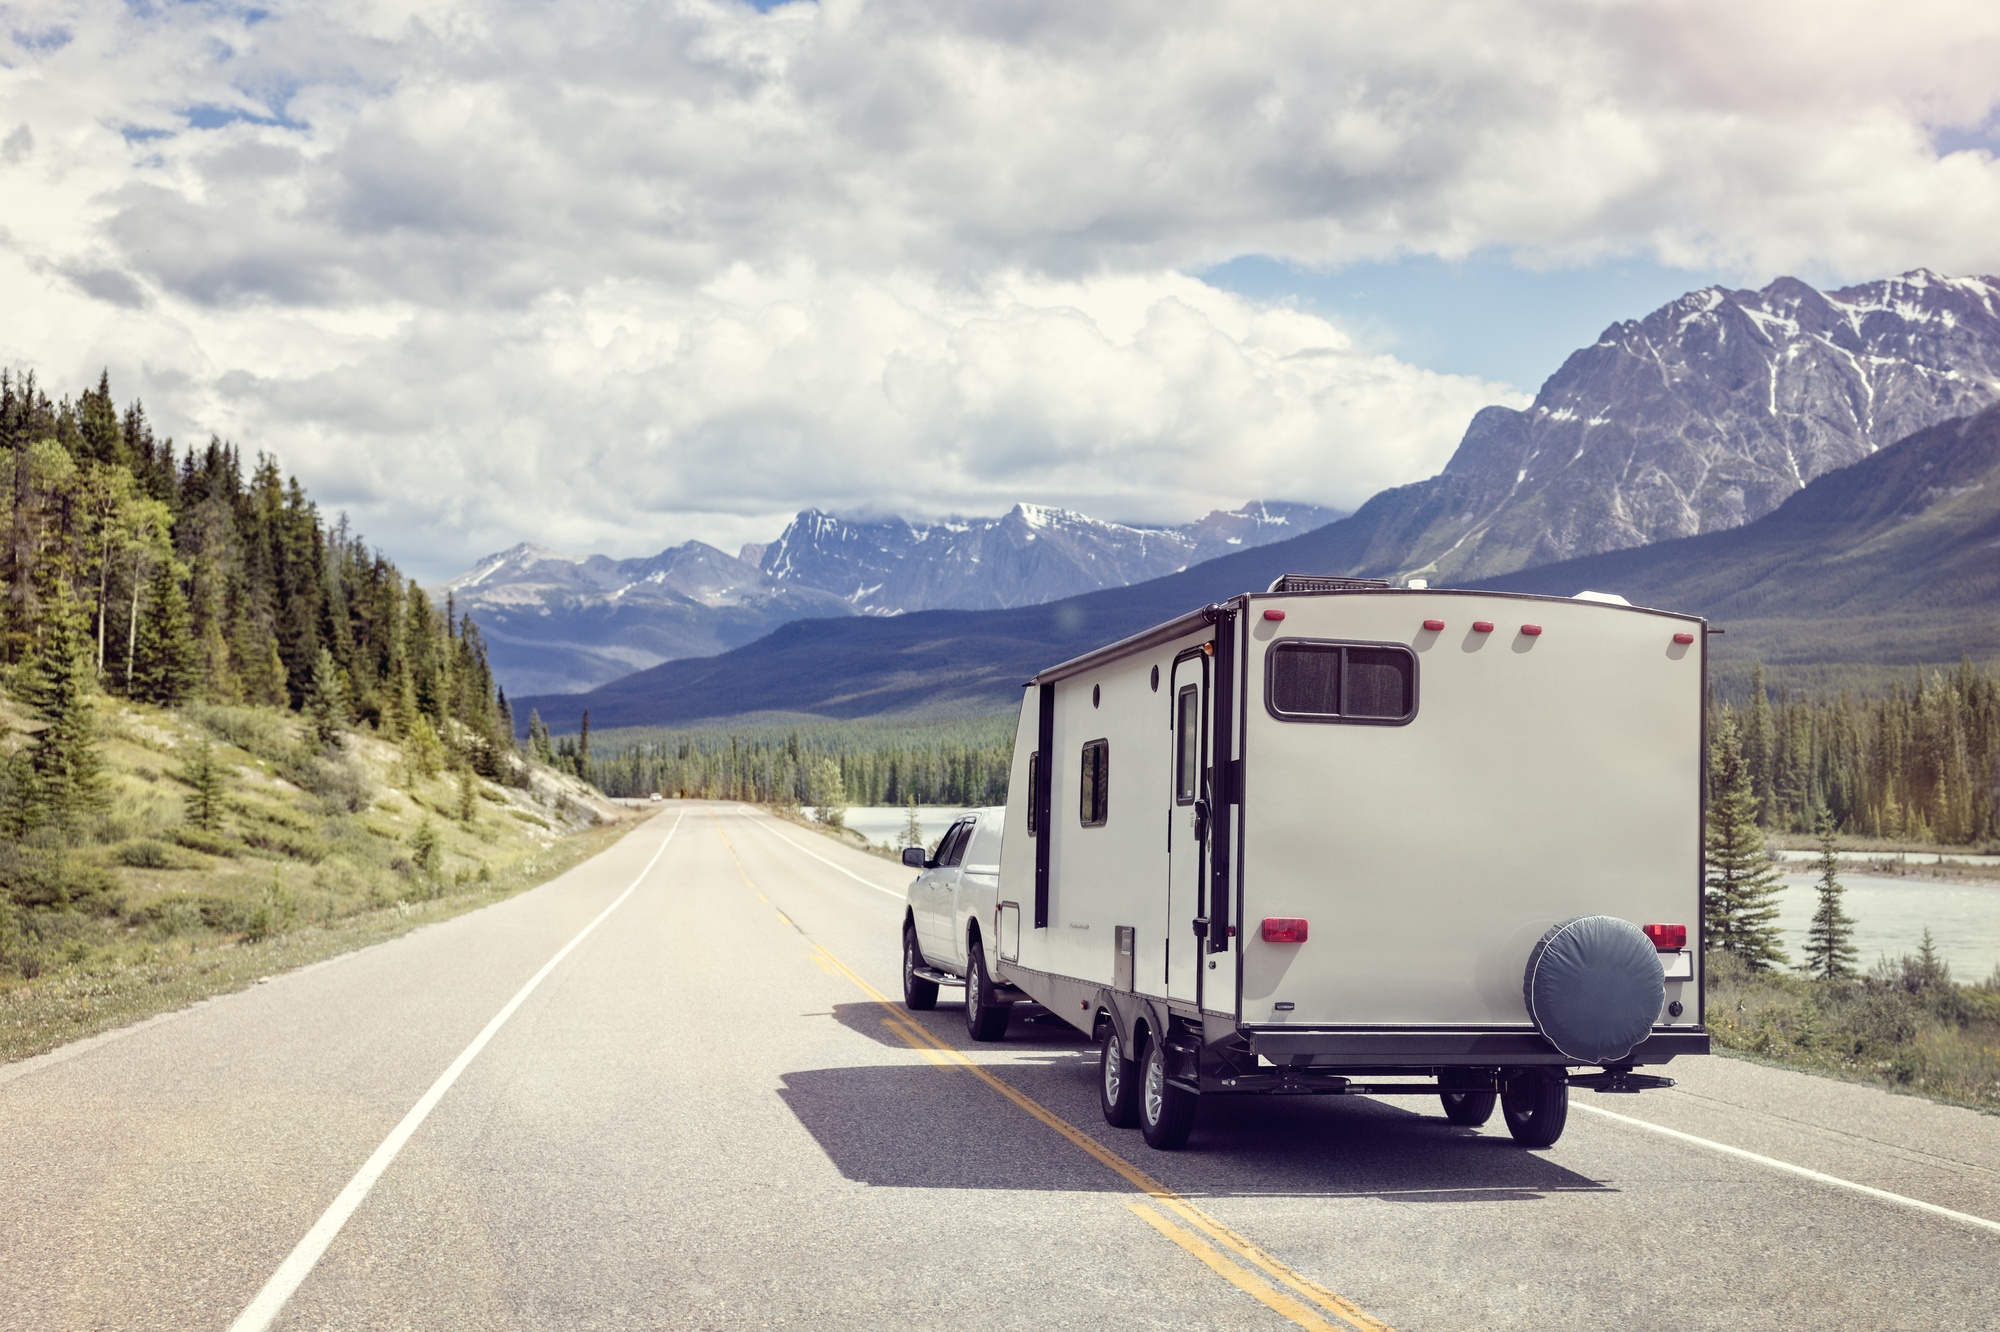 RV vs Camper: The Main Differences Explained